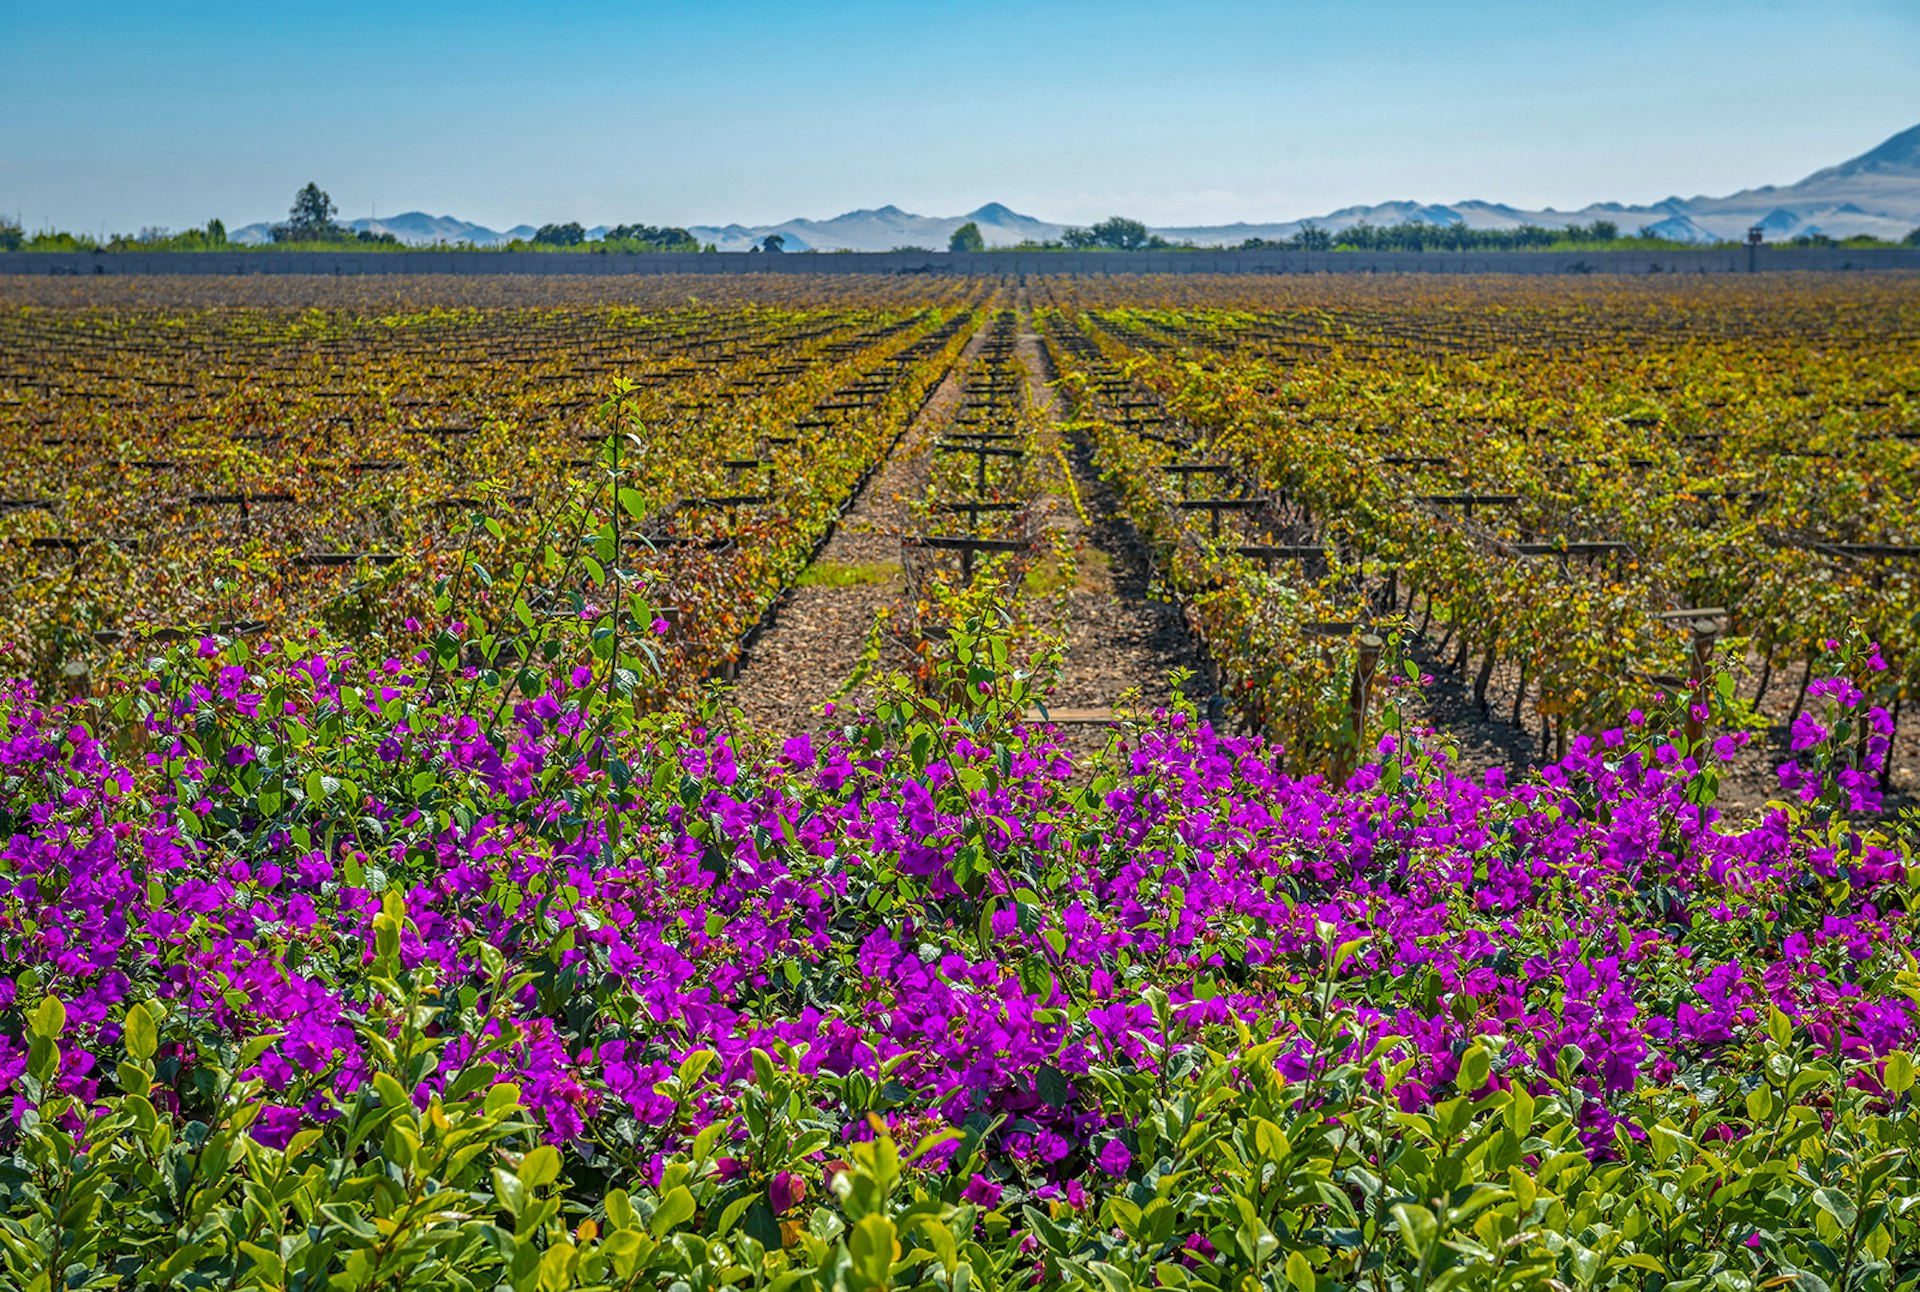 A view of a pisco vineyard in Peru with fuchsia bougainvillea flowers in the foreground